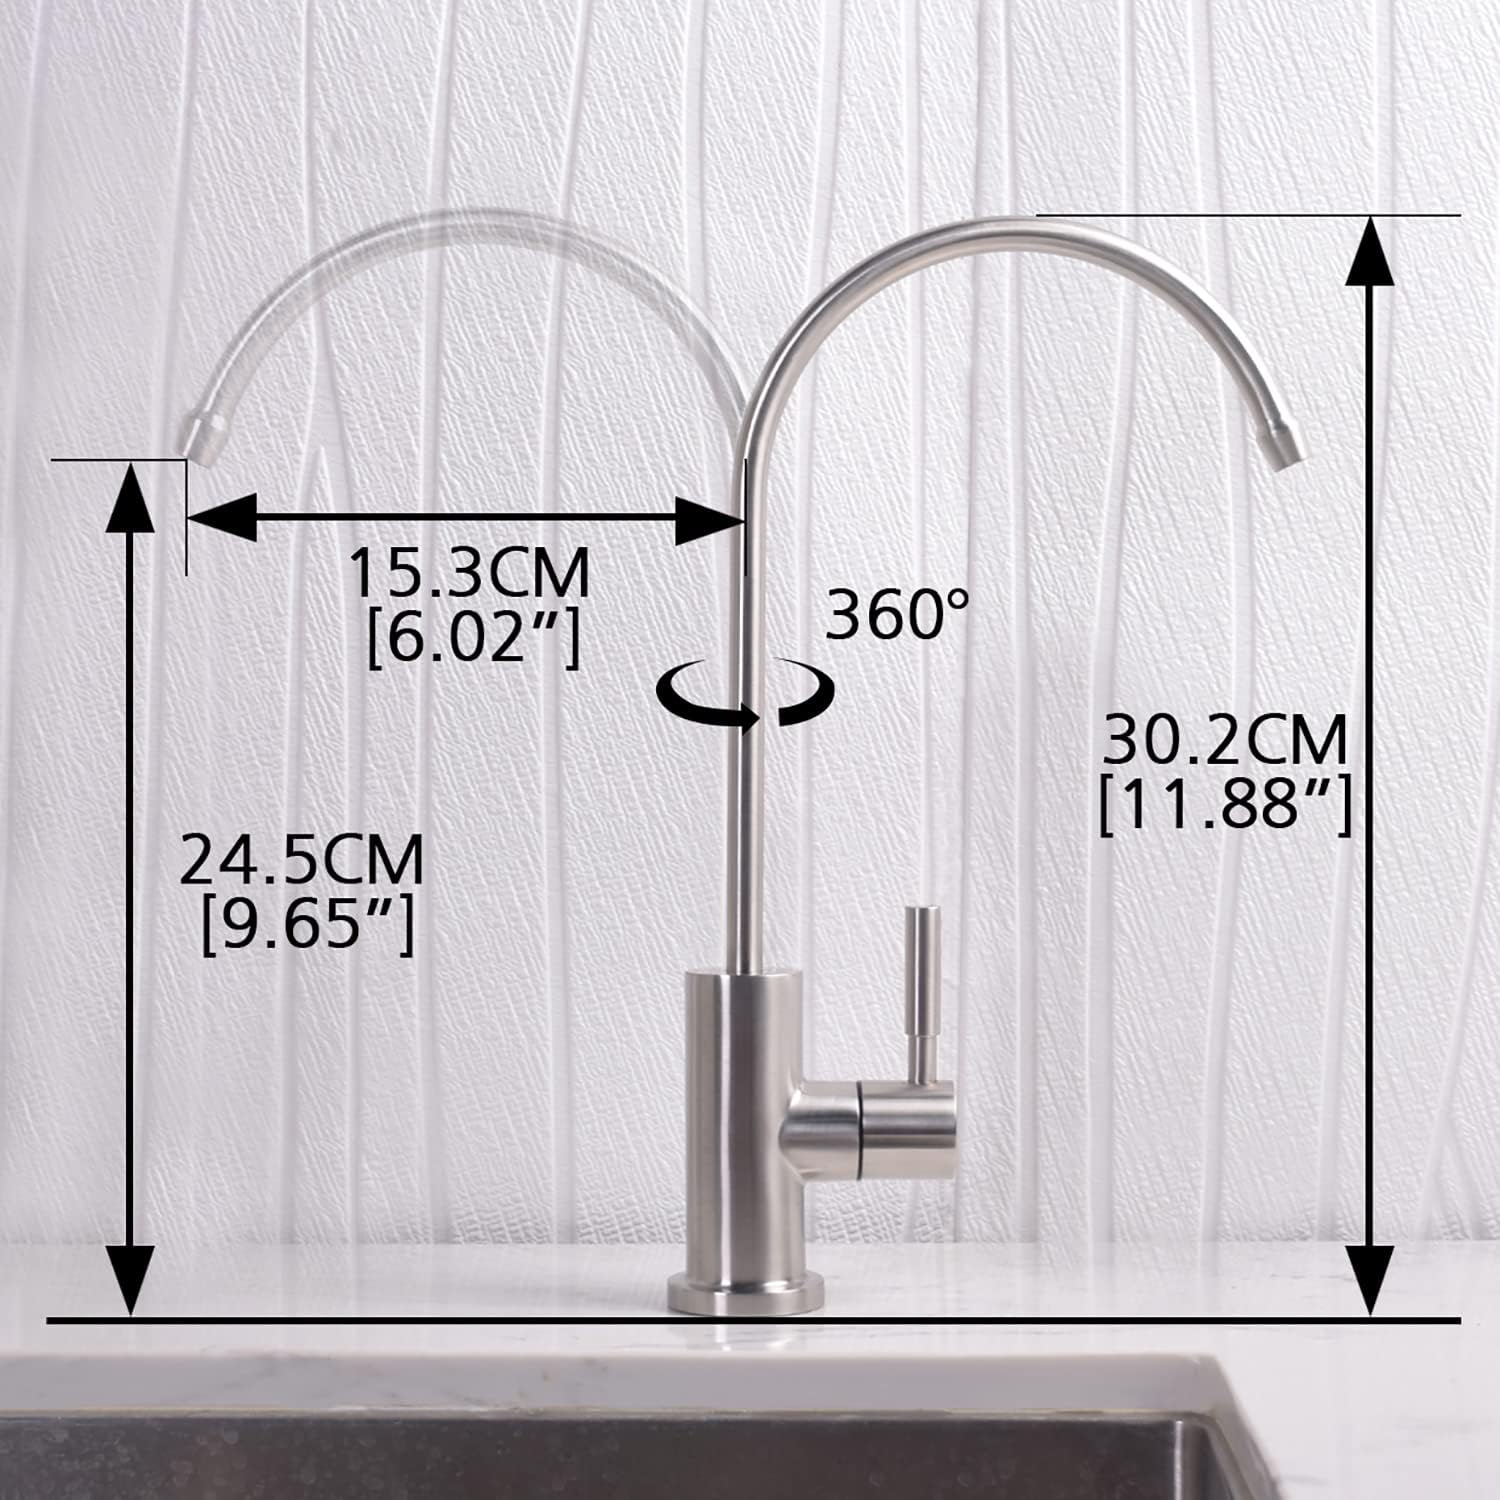 Trywell Kitchen Bar Drinking Water Faucet RO Non Air Gap Beverage Cold Water Purifier Filtration Tap Heavy Duty SUS304 Food Gra